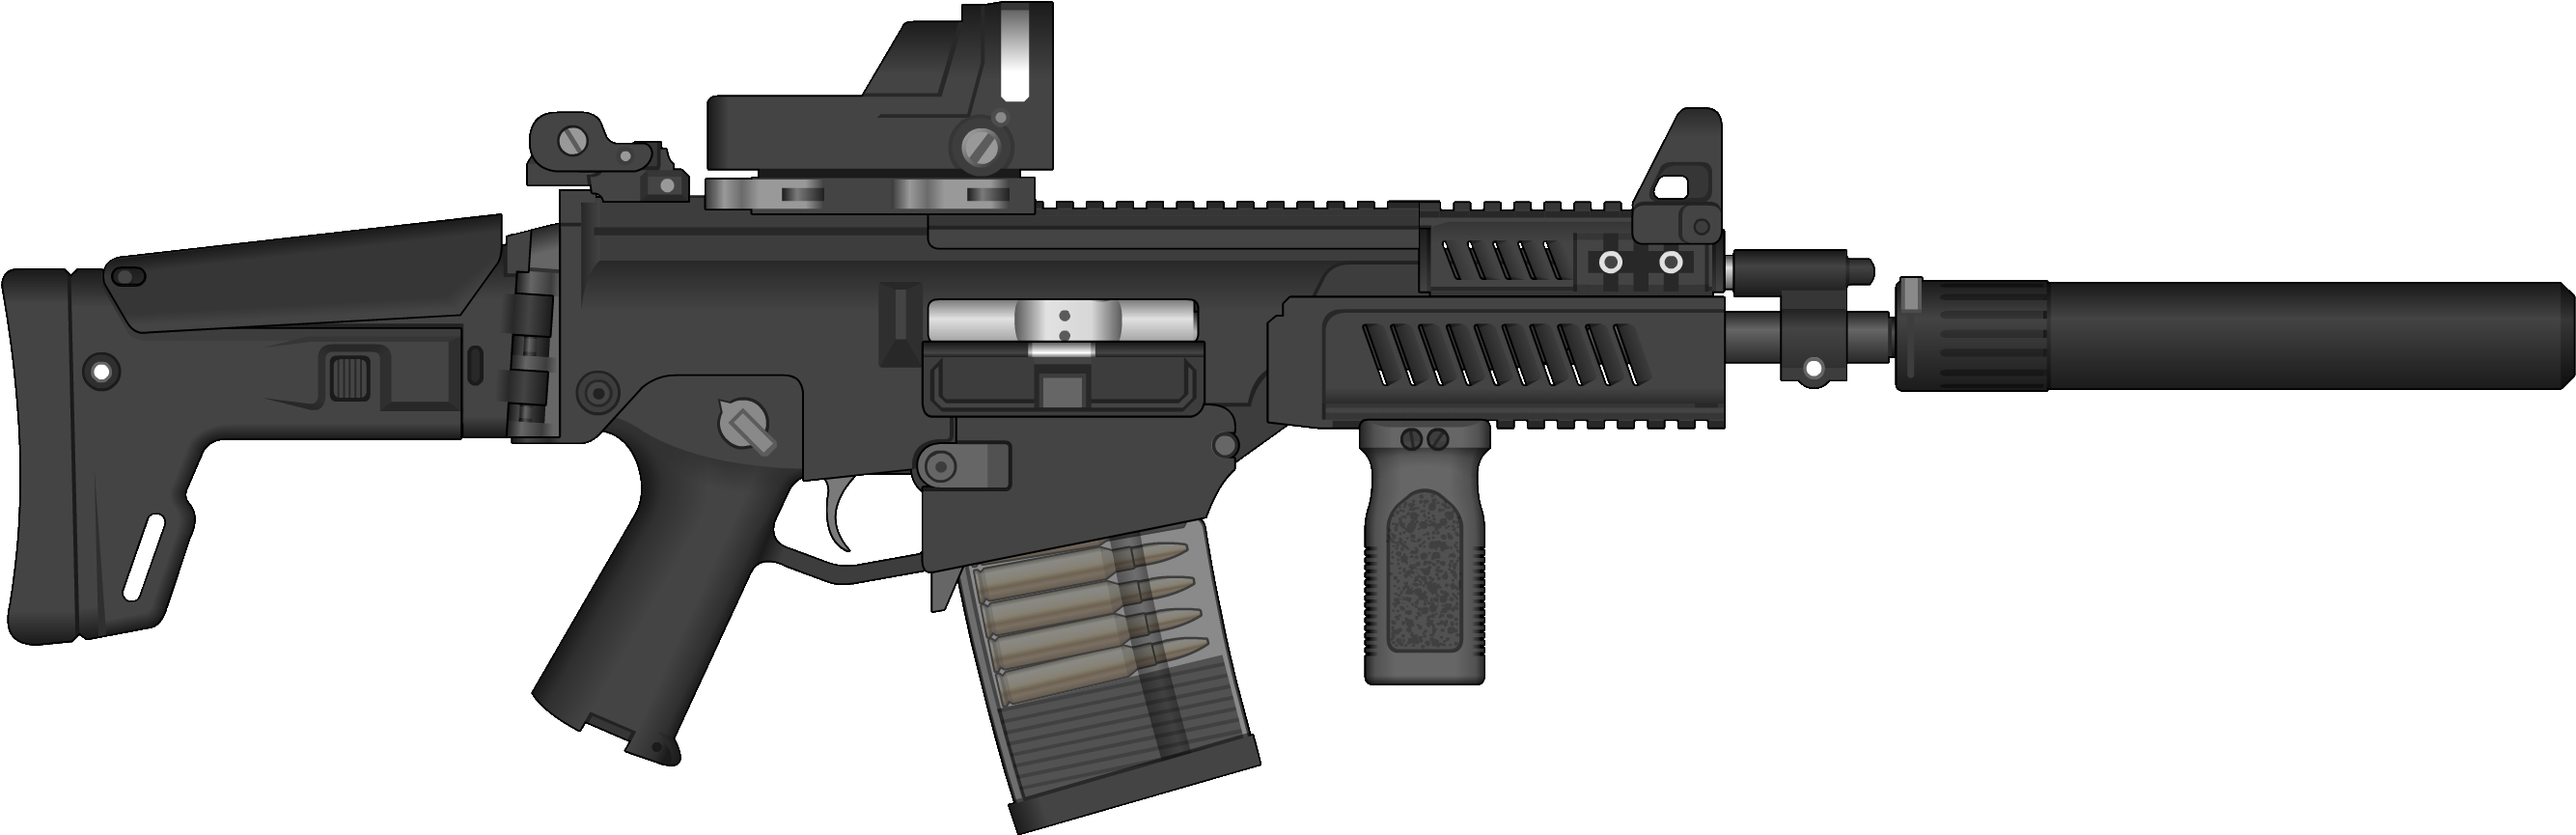 Modern Tactical Rifle Illustration PNG